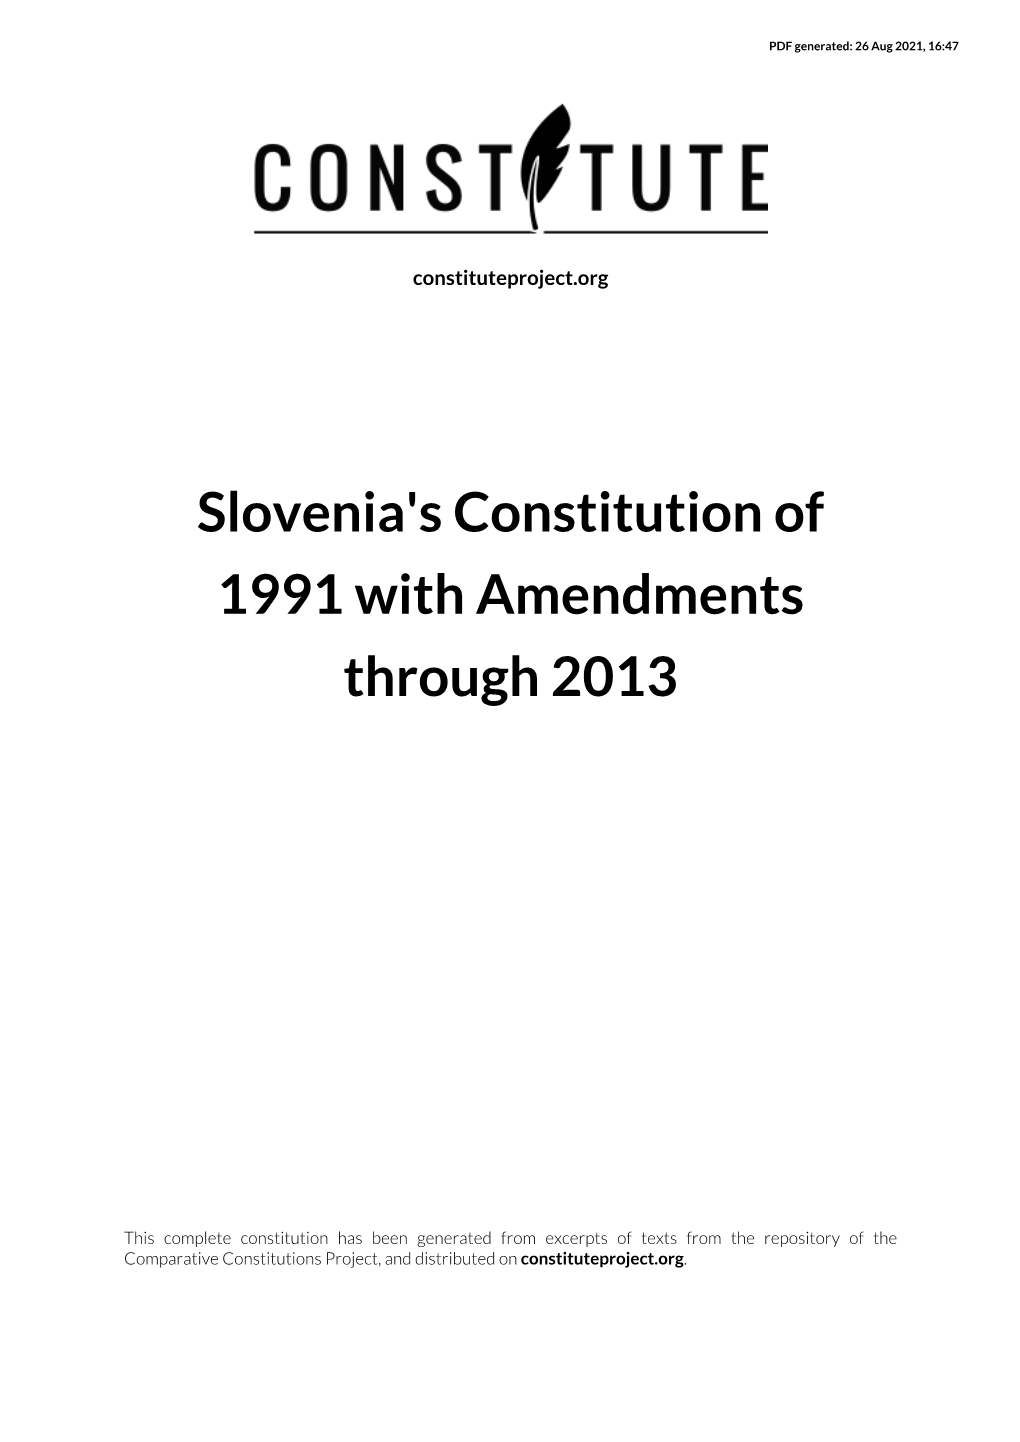 Slovenia's Constitution of 1991 with Amendments Through 2013